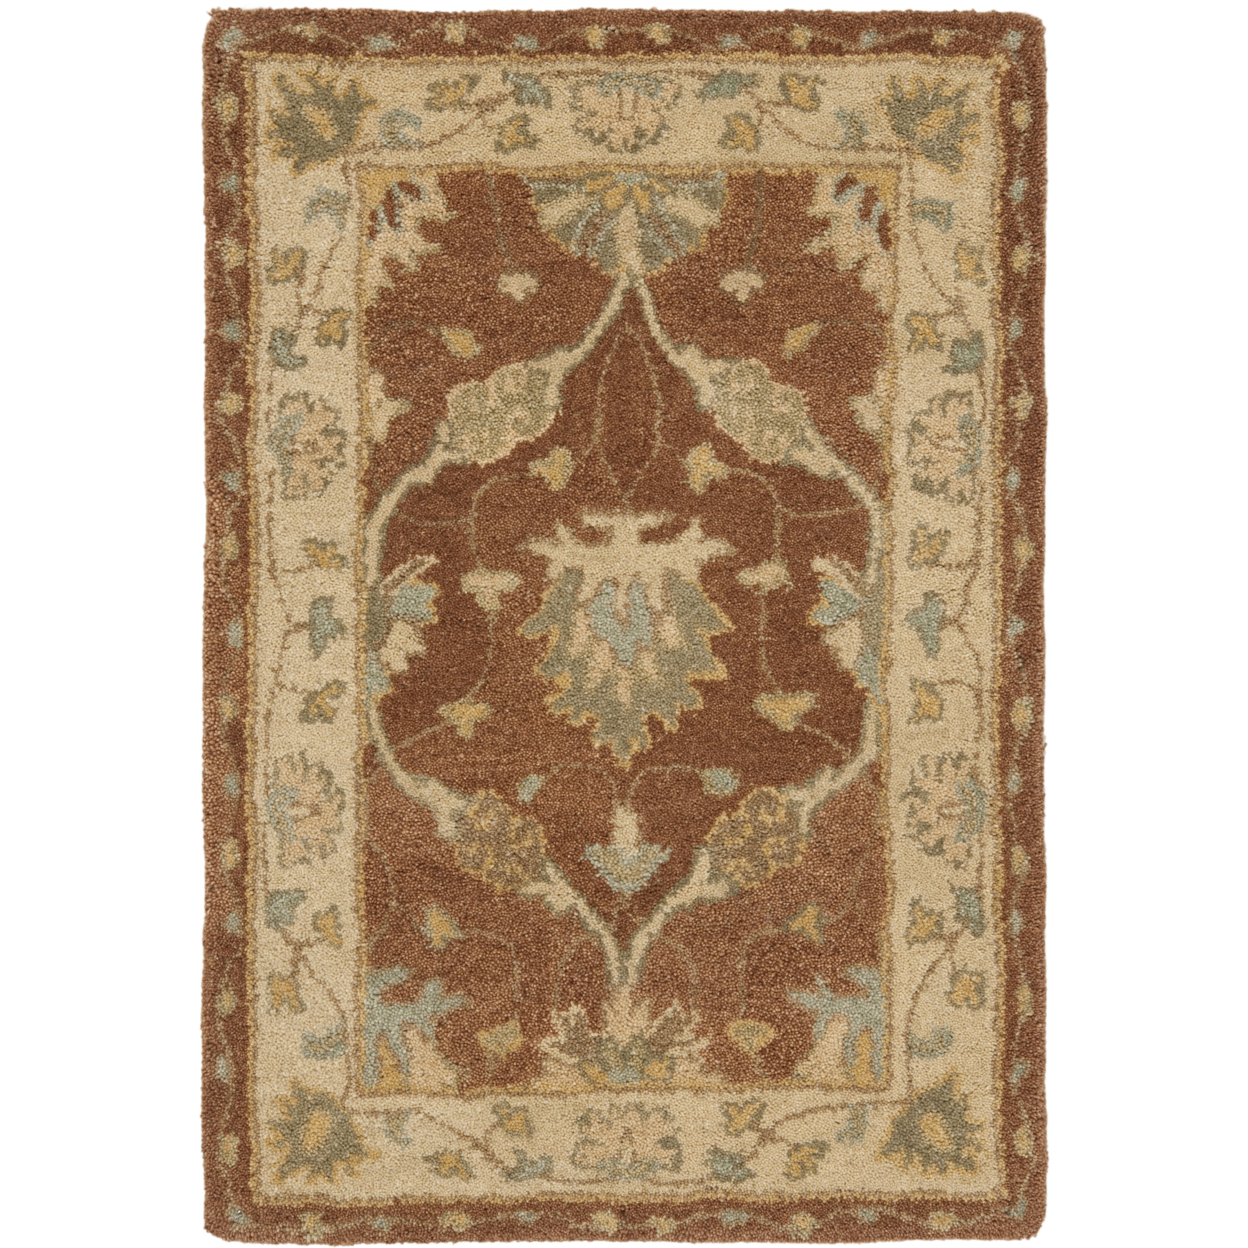 SAFAVIEH Antiquity AT315A Handmade Brown / Taupe Rug - 2' X 3'